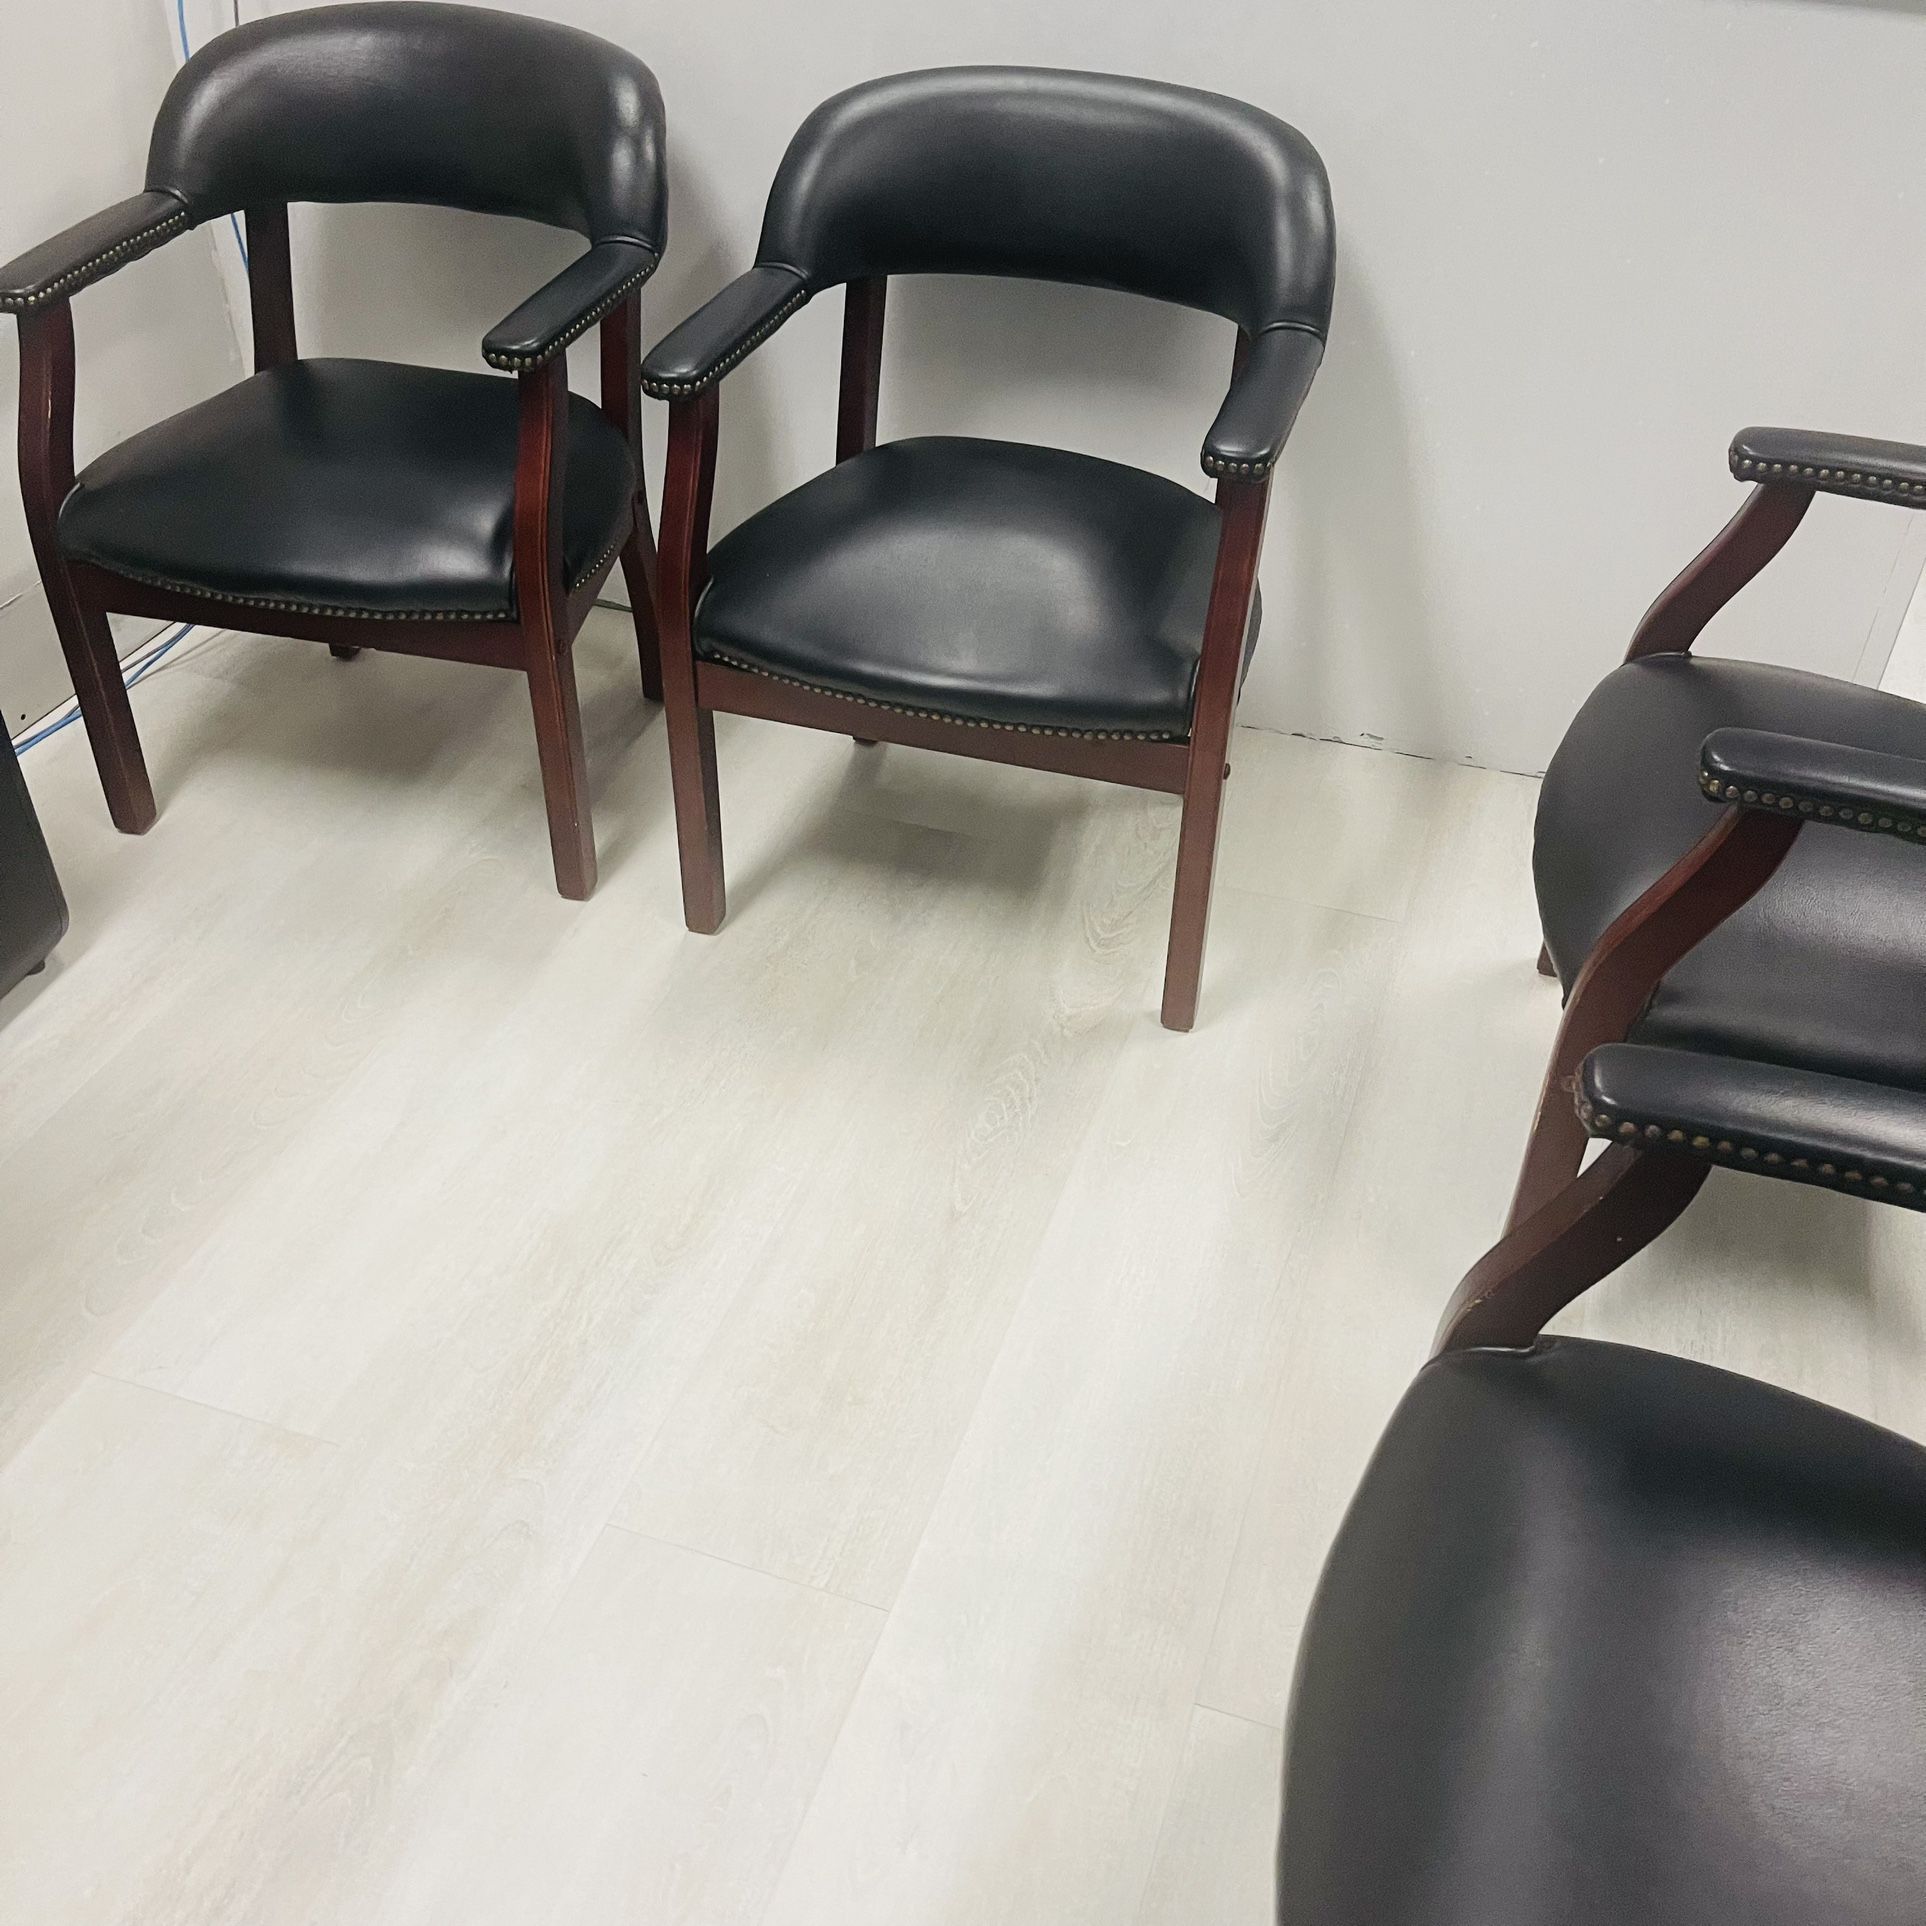 7 Office Chairs